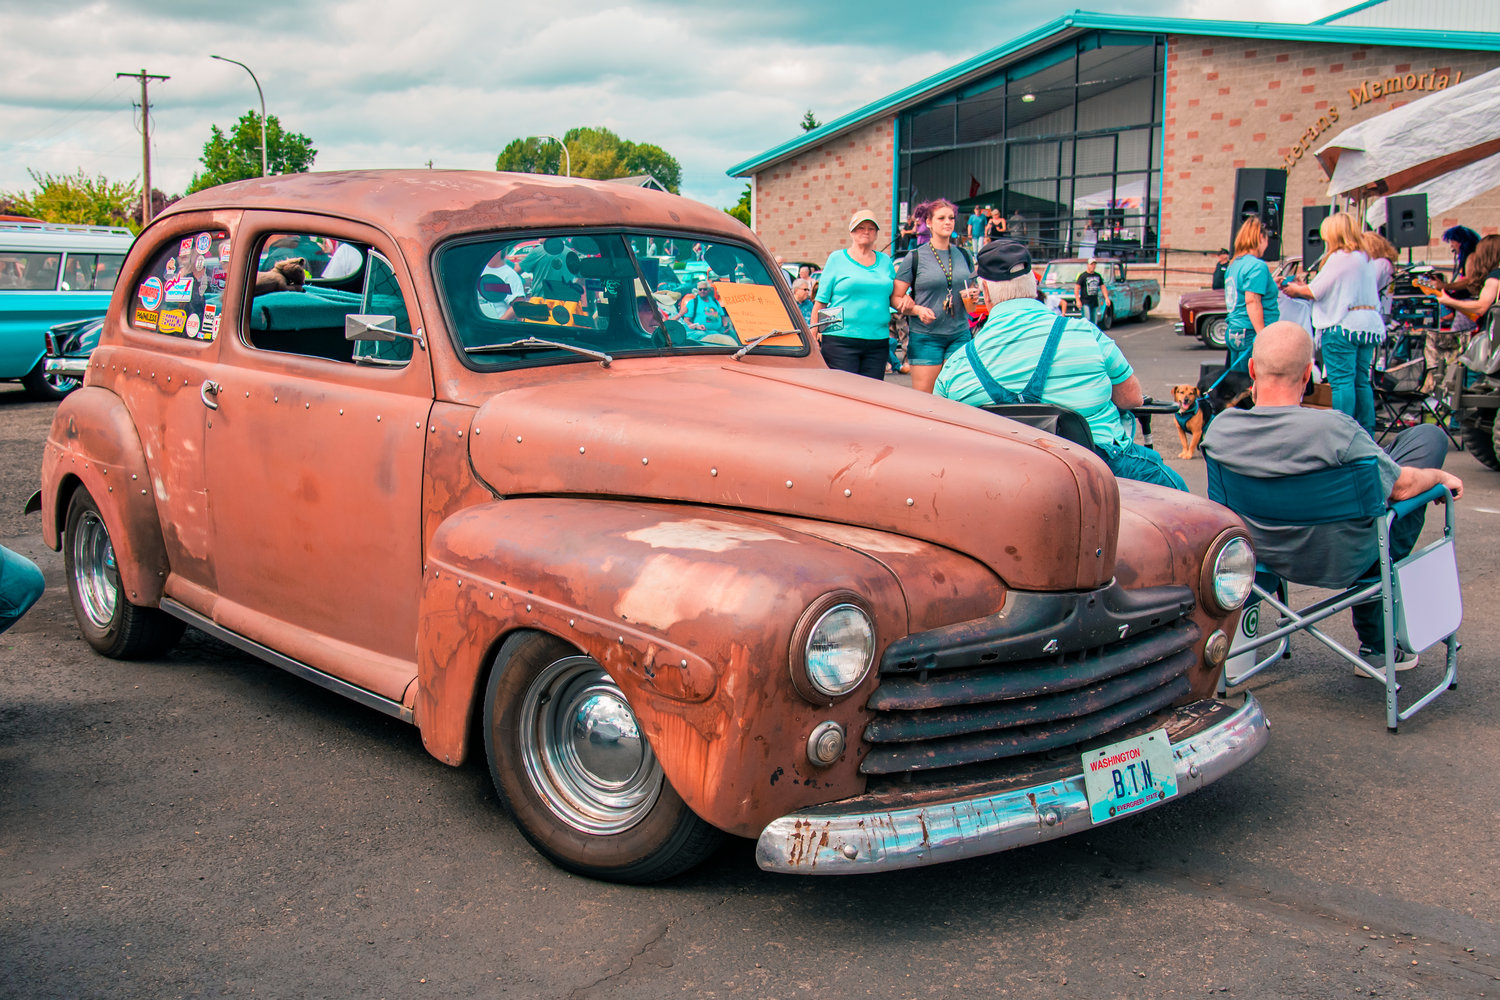 A rusty 1947 Ford Sedan sits on display at the Rust or Shine Car Show and Music Festival in Chehalis on Sunday.